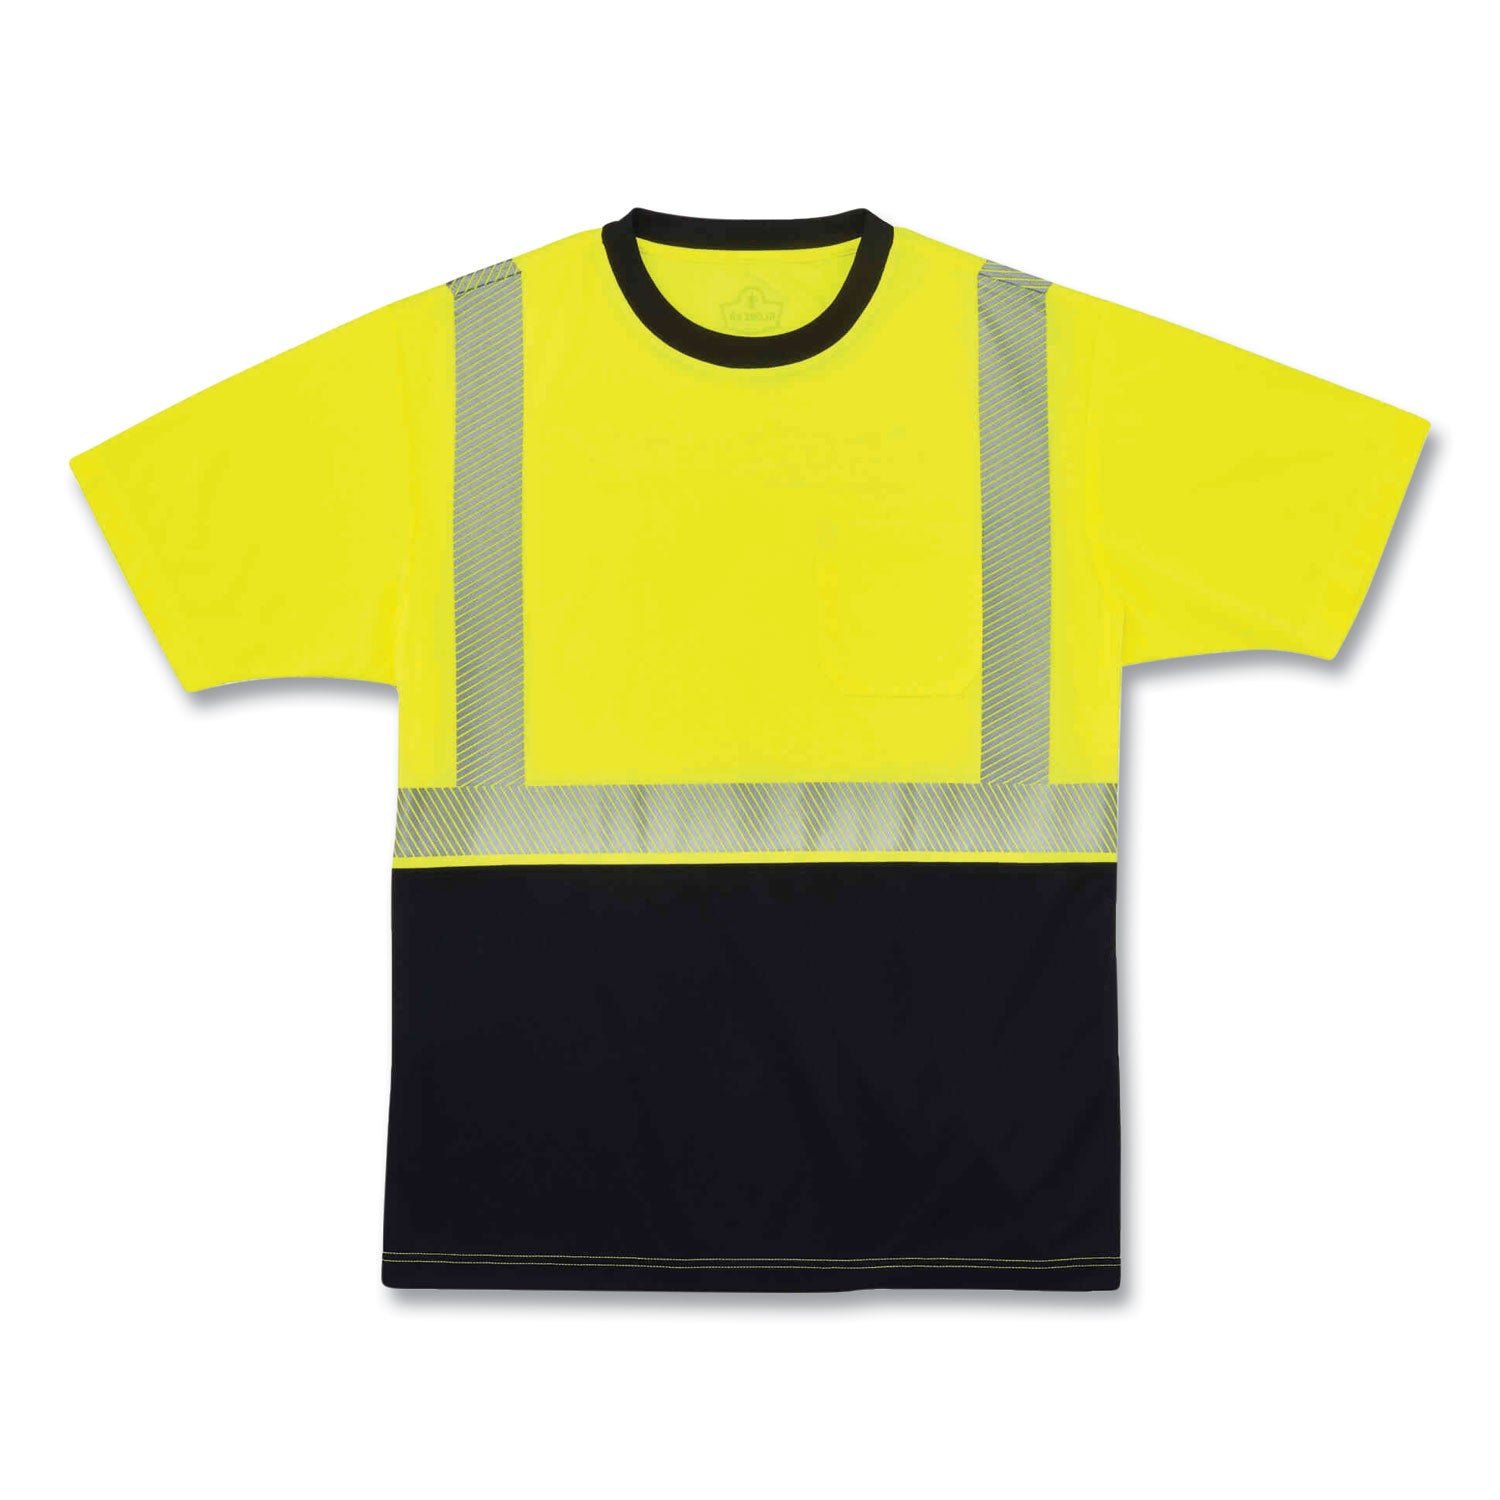 glowear-8280bk-class-2-performance-t-shirt-with-black-bottom-polyester-4x-large-lime-ships-in-1-3-business-days_ego22538 - 1